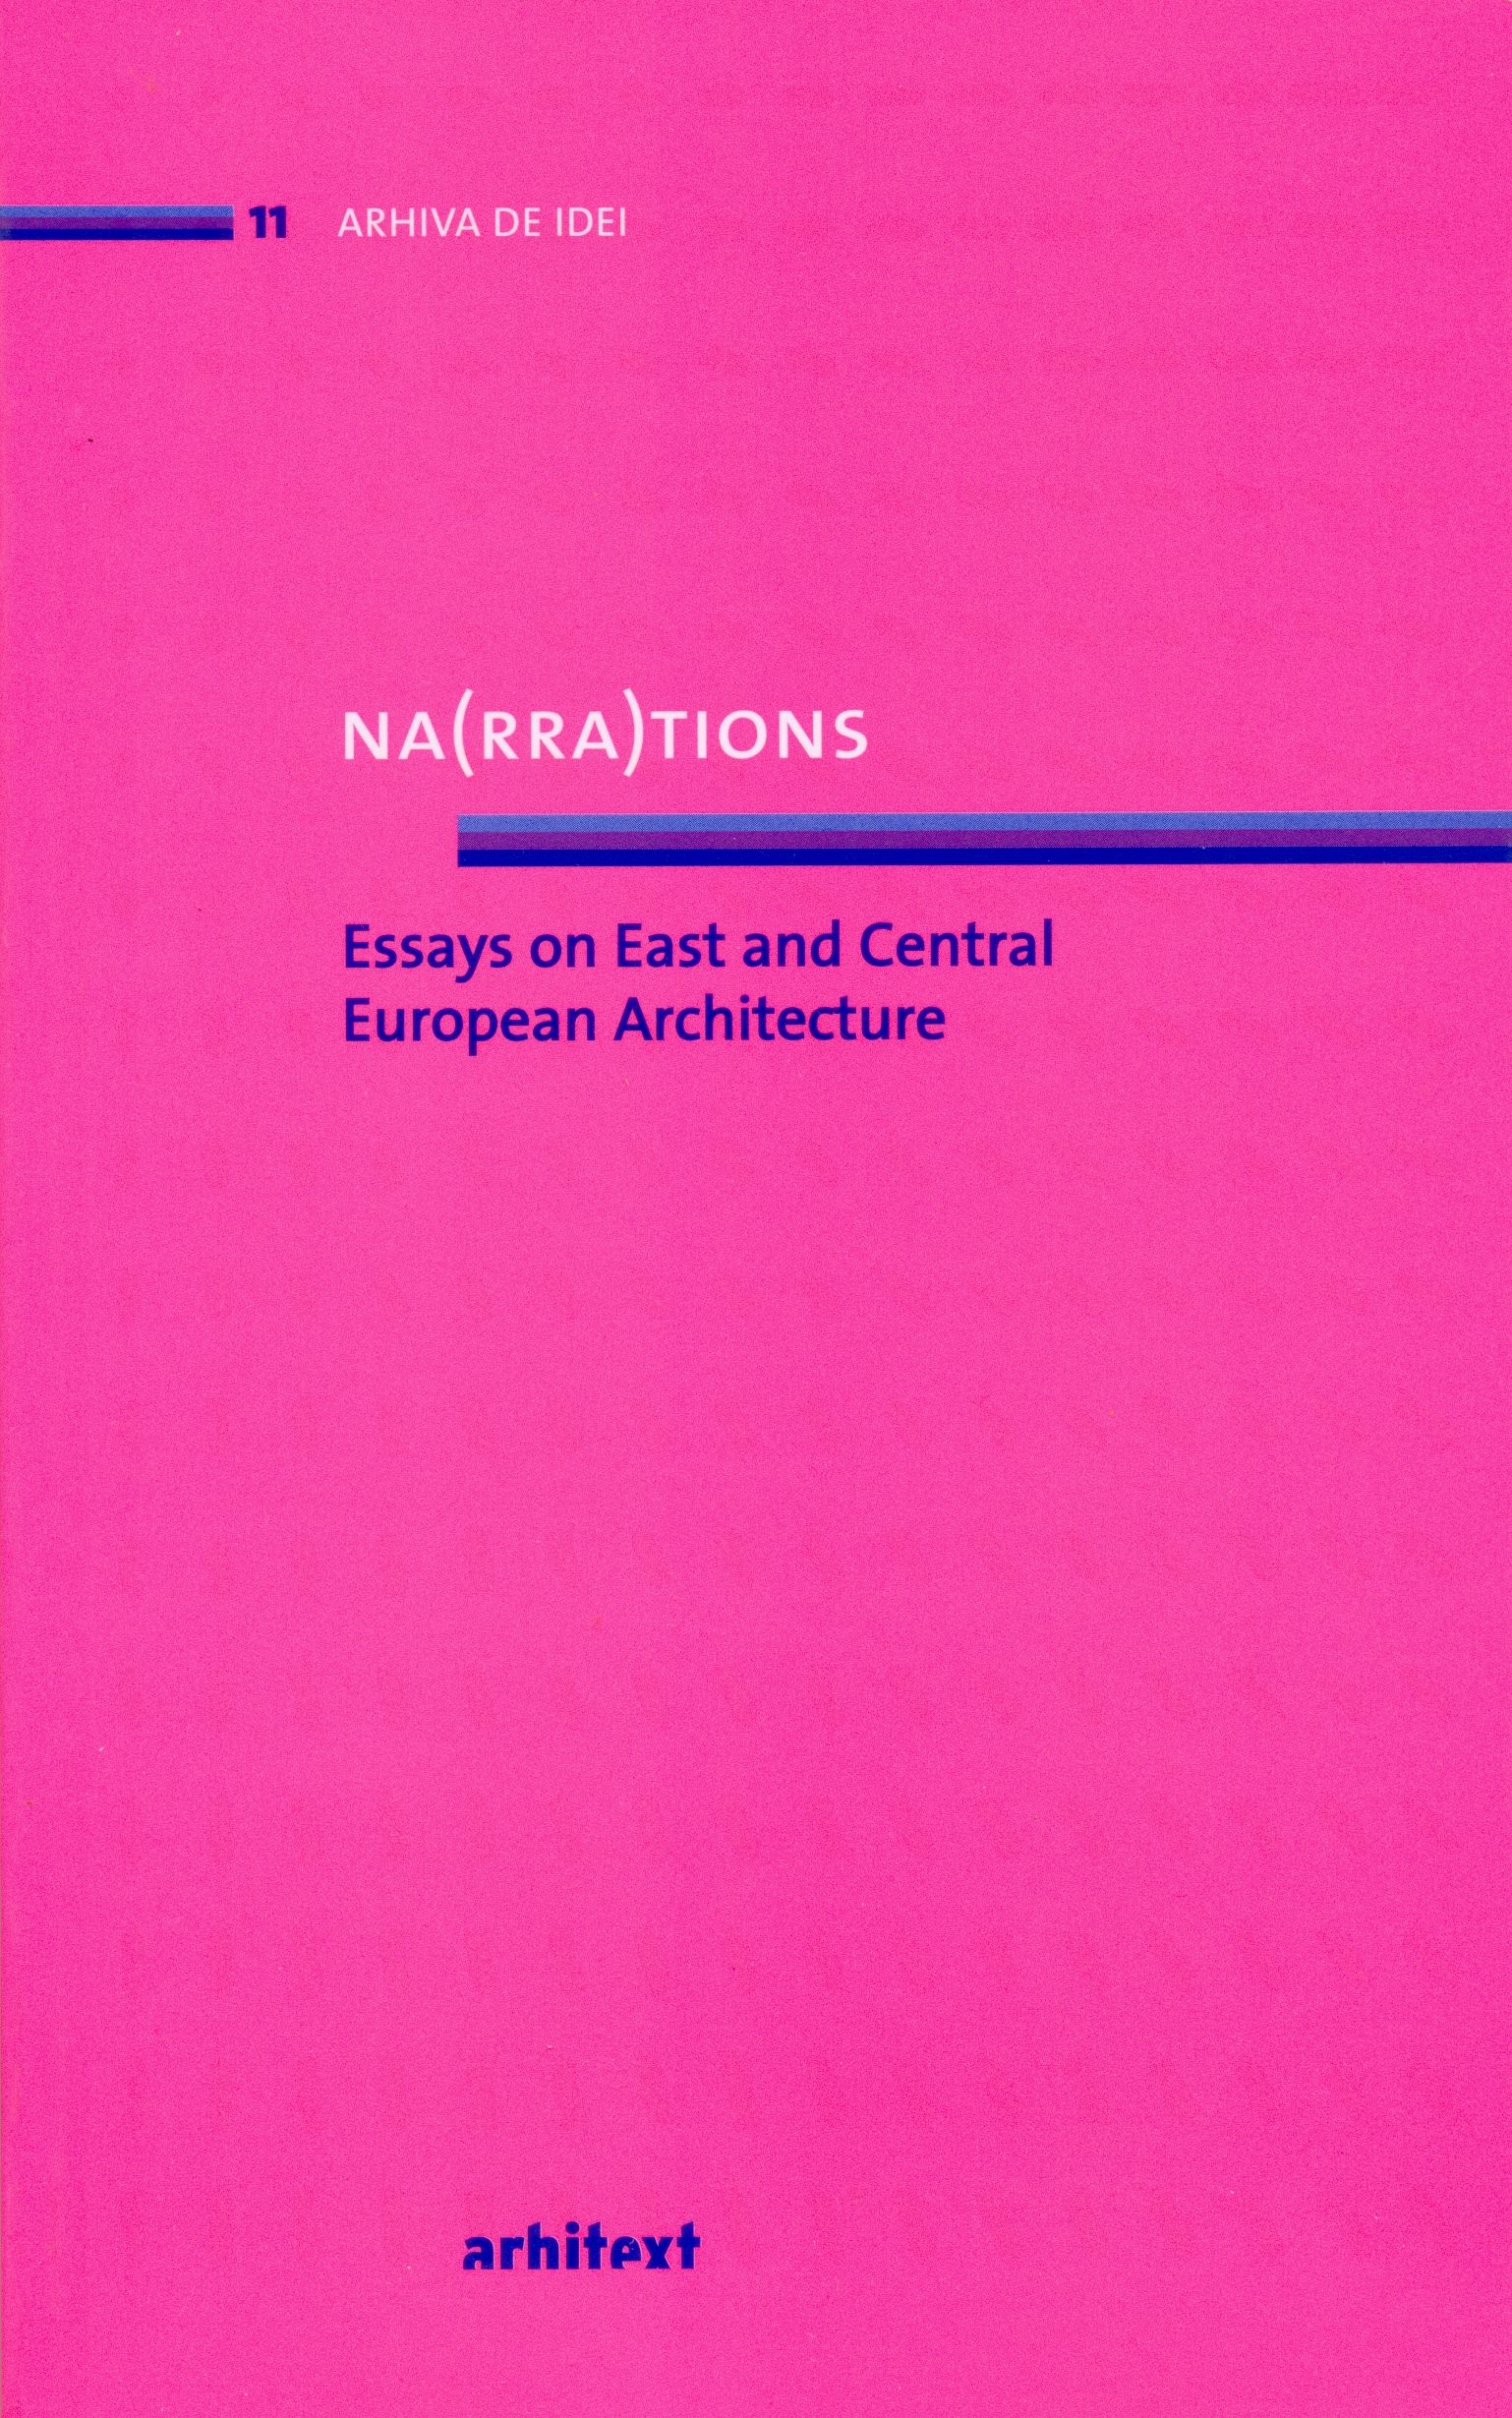 Na(rra)tions. Essays on East and Central European Architecture